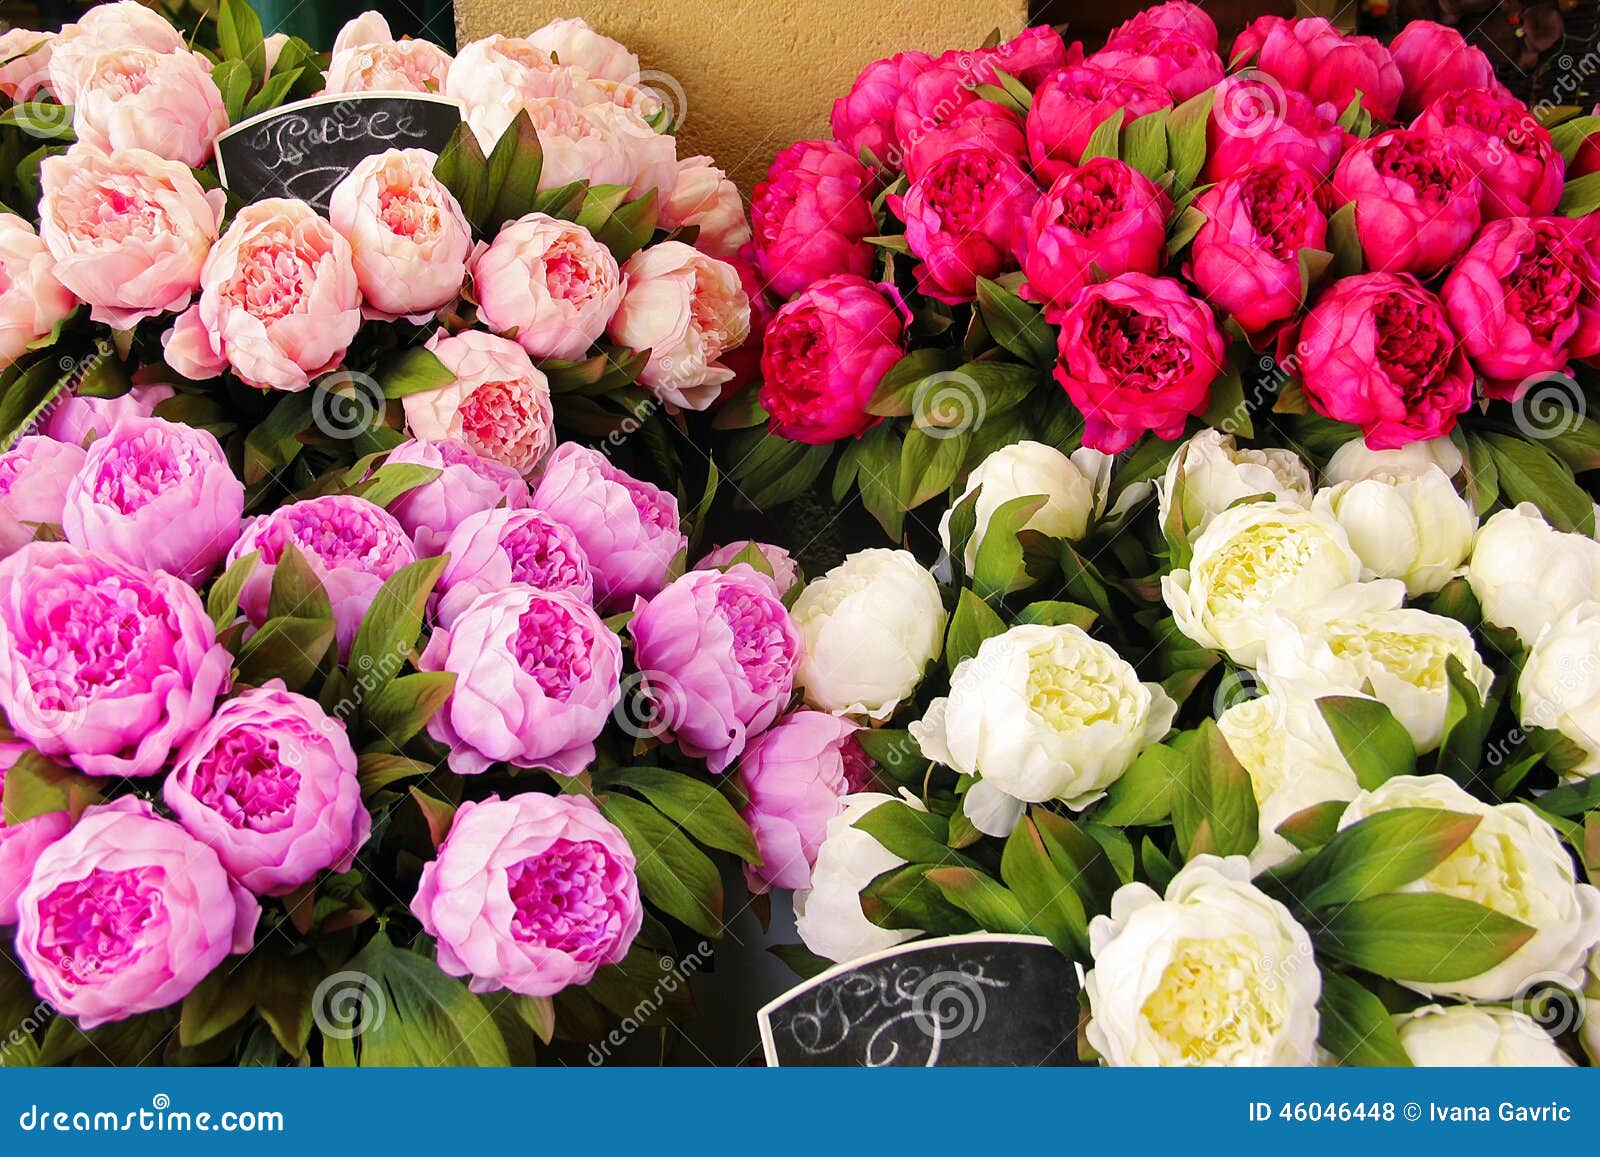 bouquet of peonies for sale